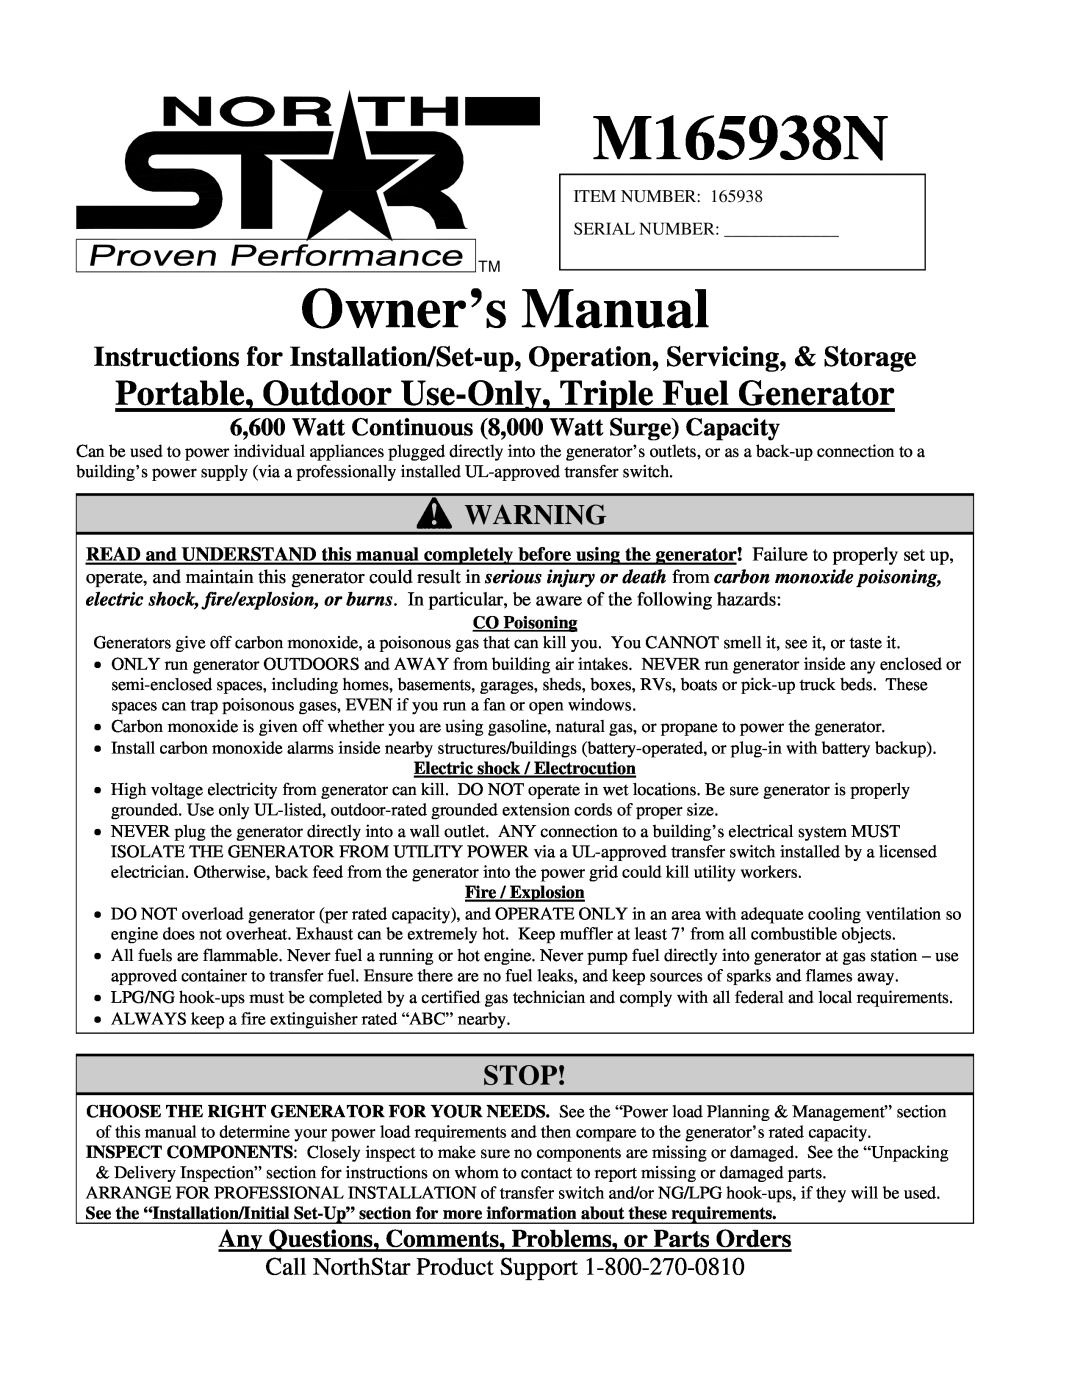 North Star M165938N owner manual Instructions for Installation/Set-up, Operation, Servicing, & Storage, Stop, CO Poisoning 